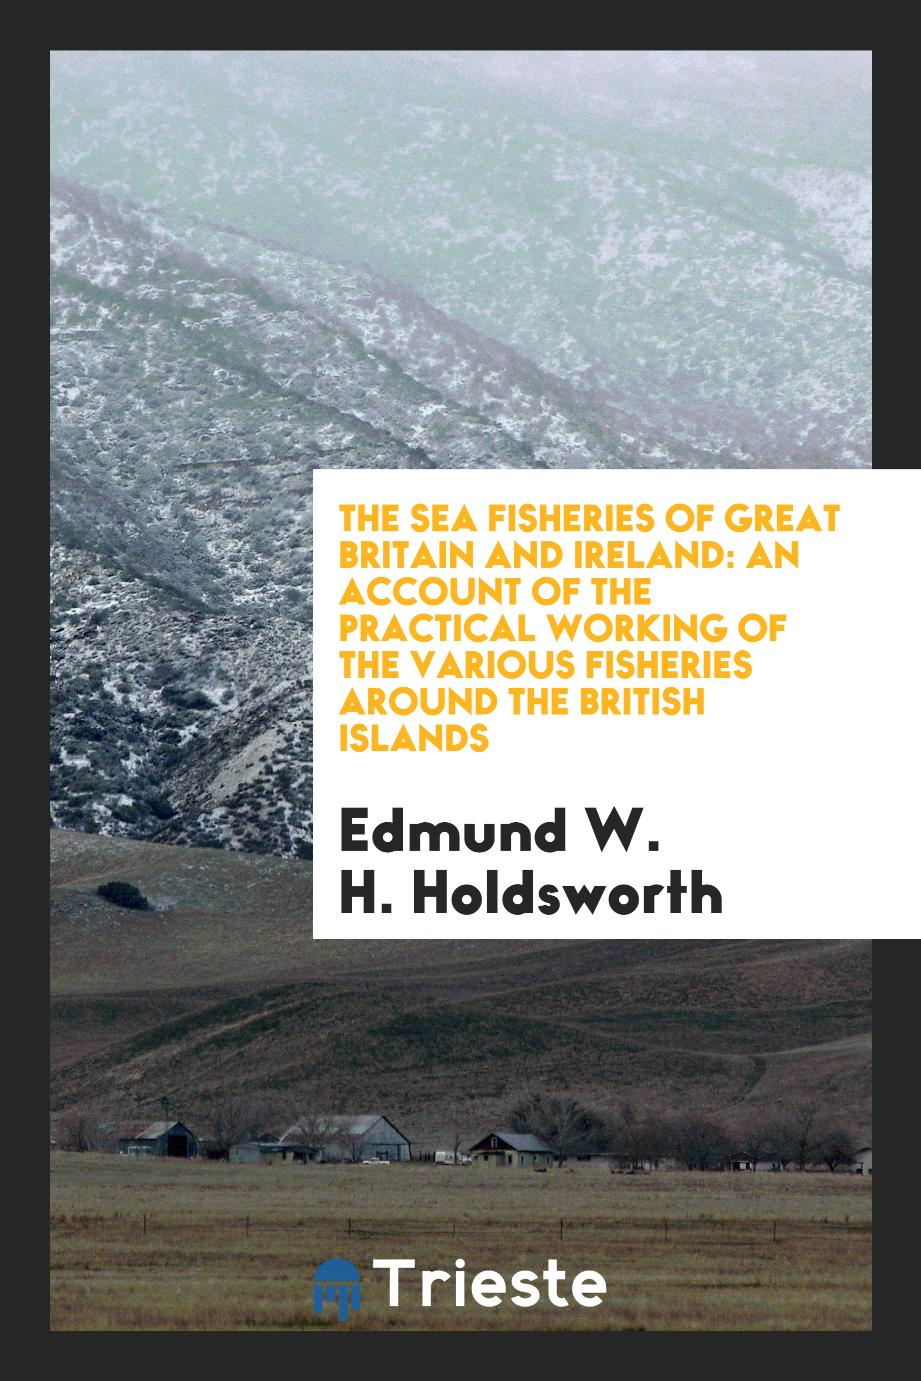 The sea fisheries of Great Britain and Ireland: an account of the practical working of the various fisheries around the British Islands